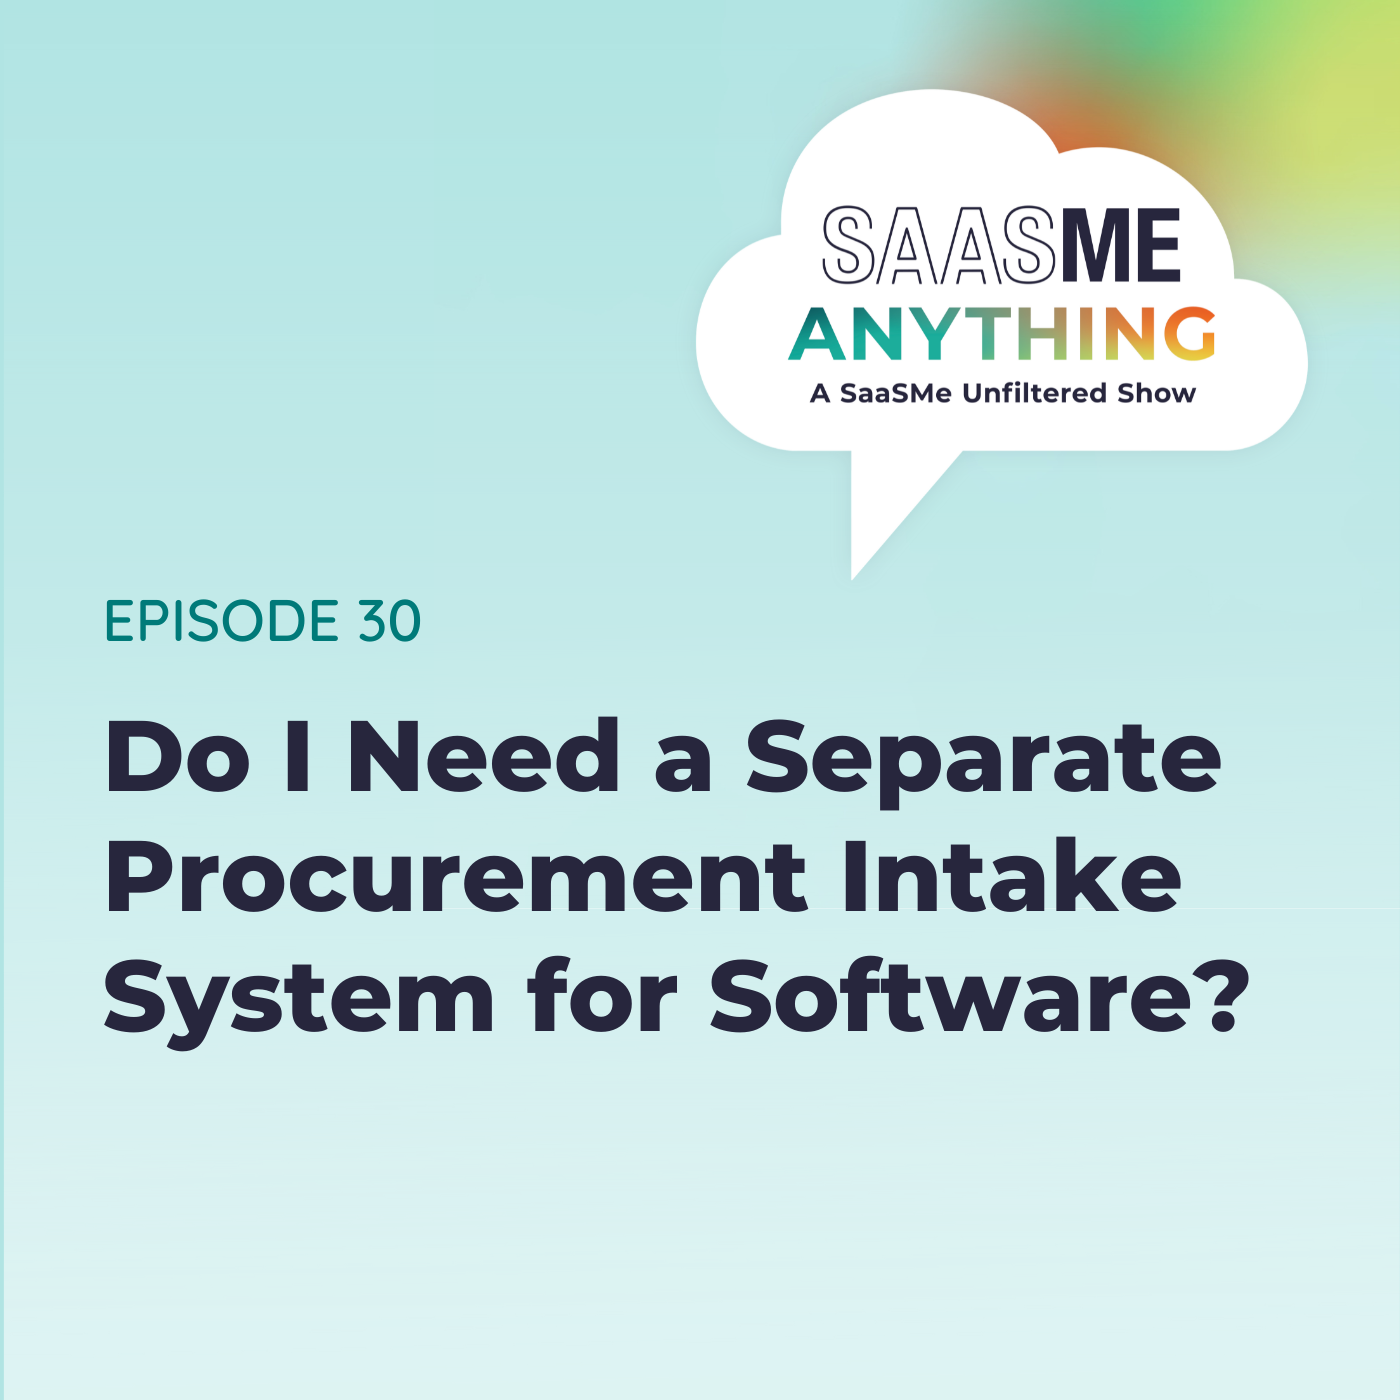 Do I Need a Separate Procurement Intake System for Software?